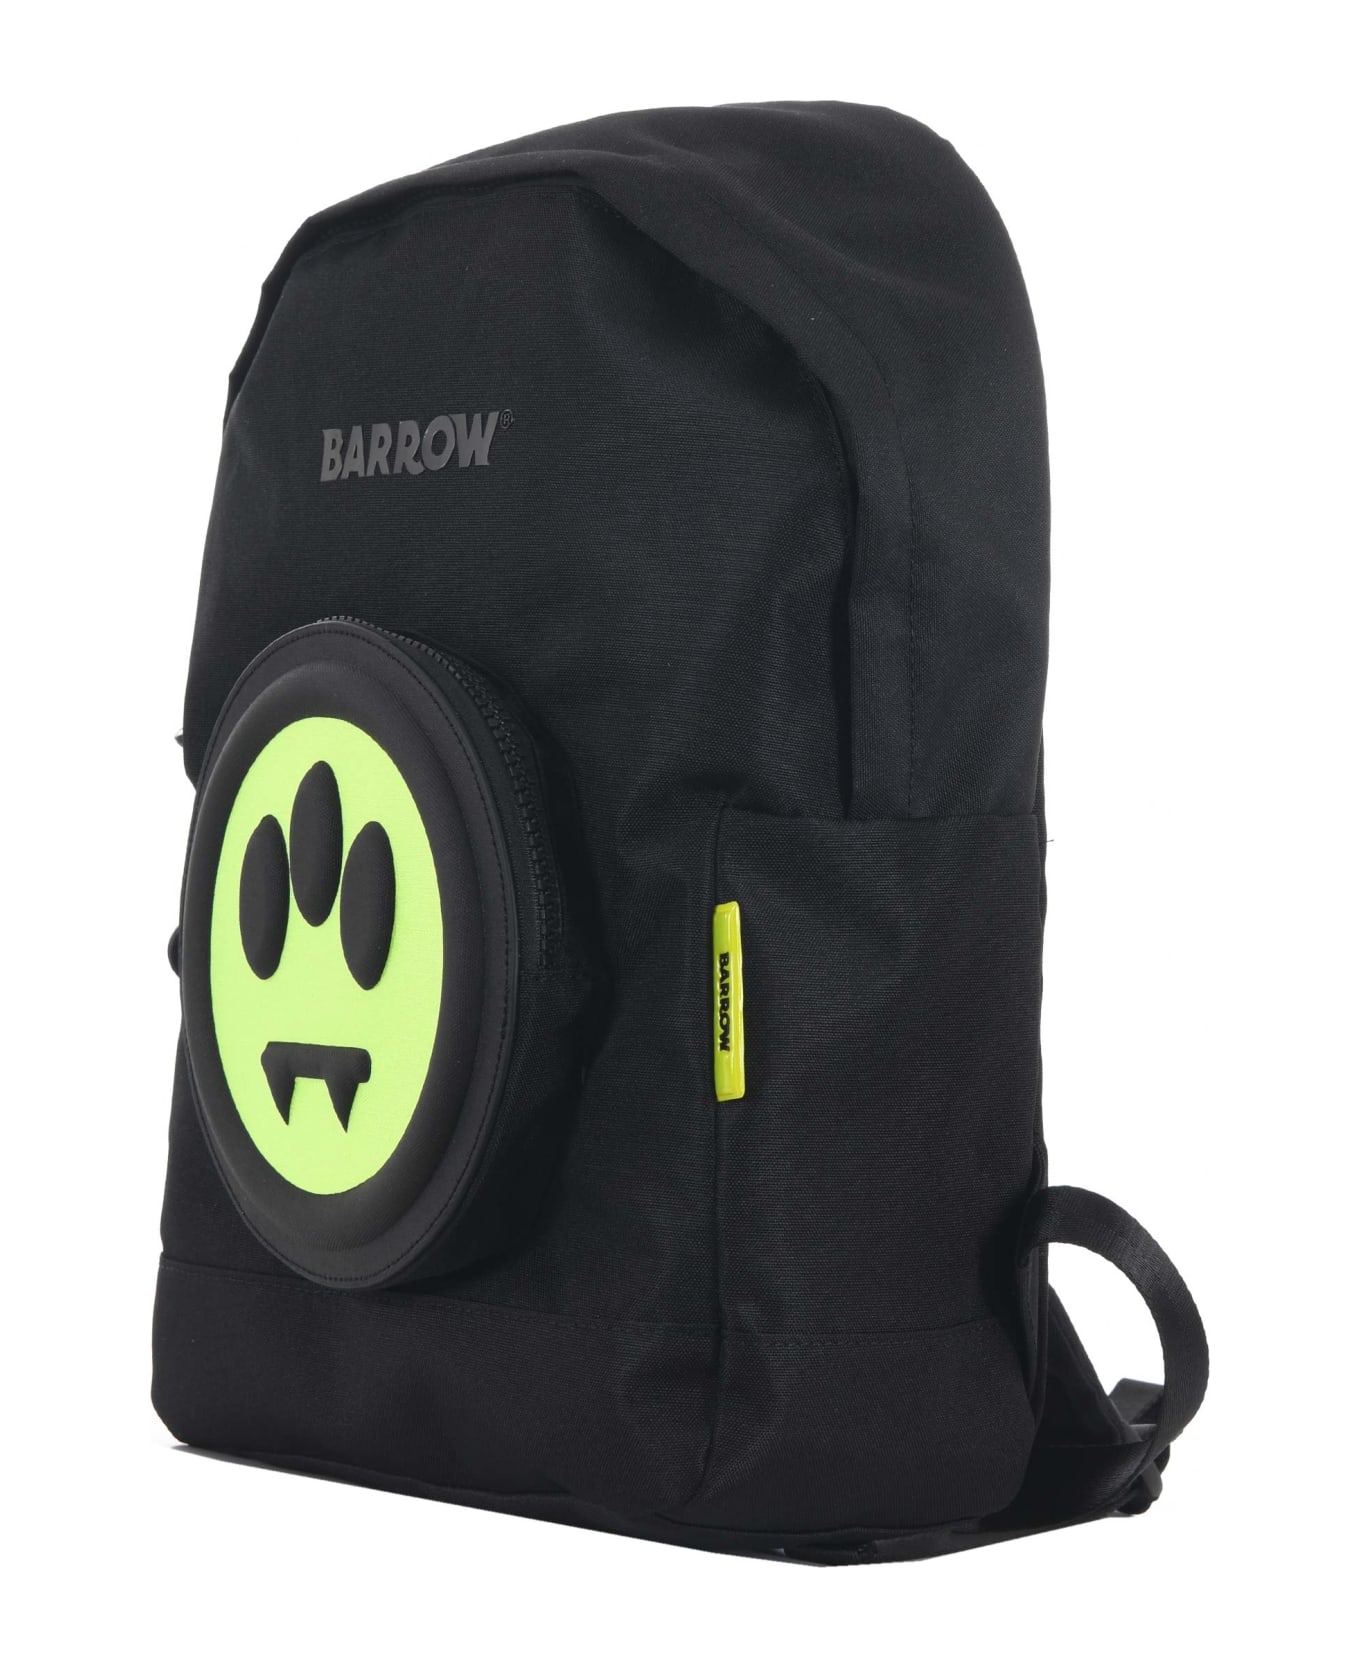 Barrow Backpack - Nero/giallo fluo バックパック